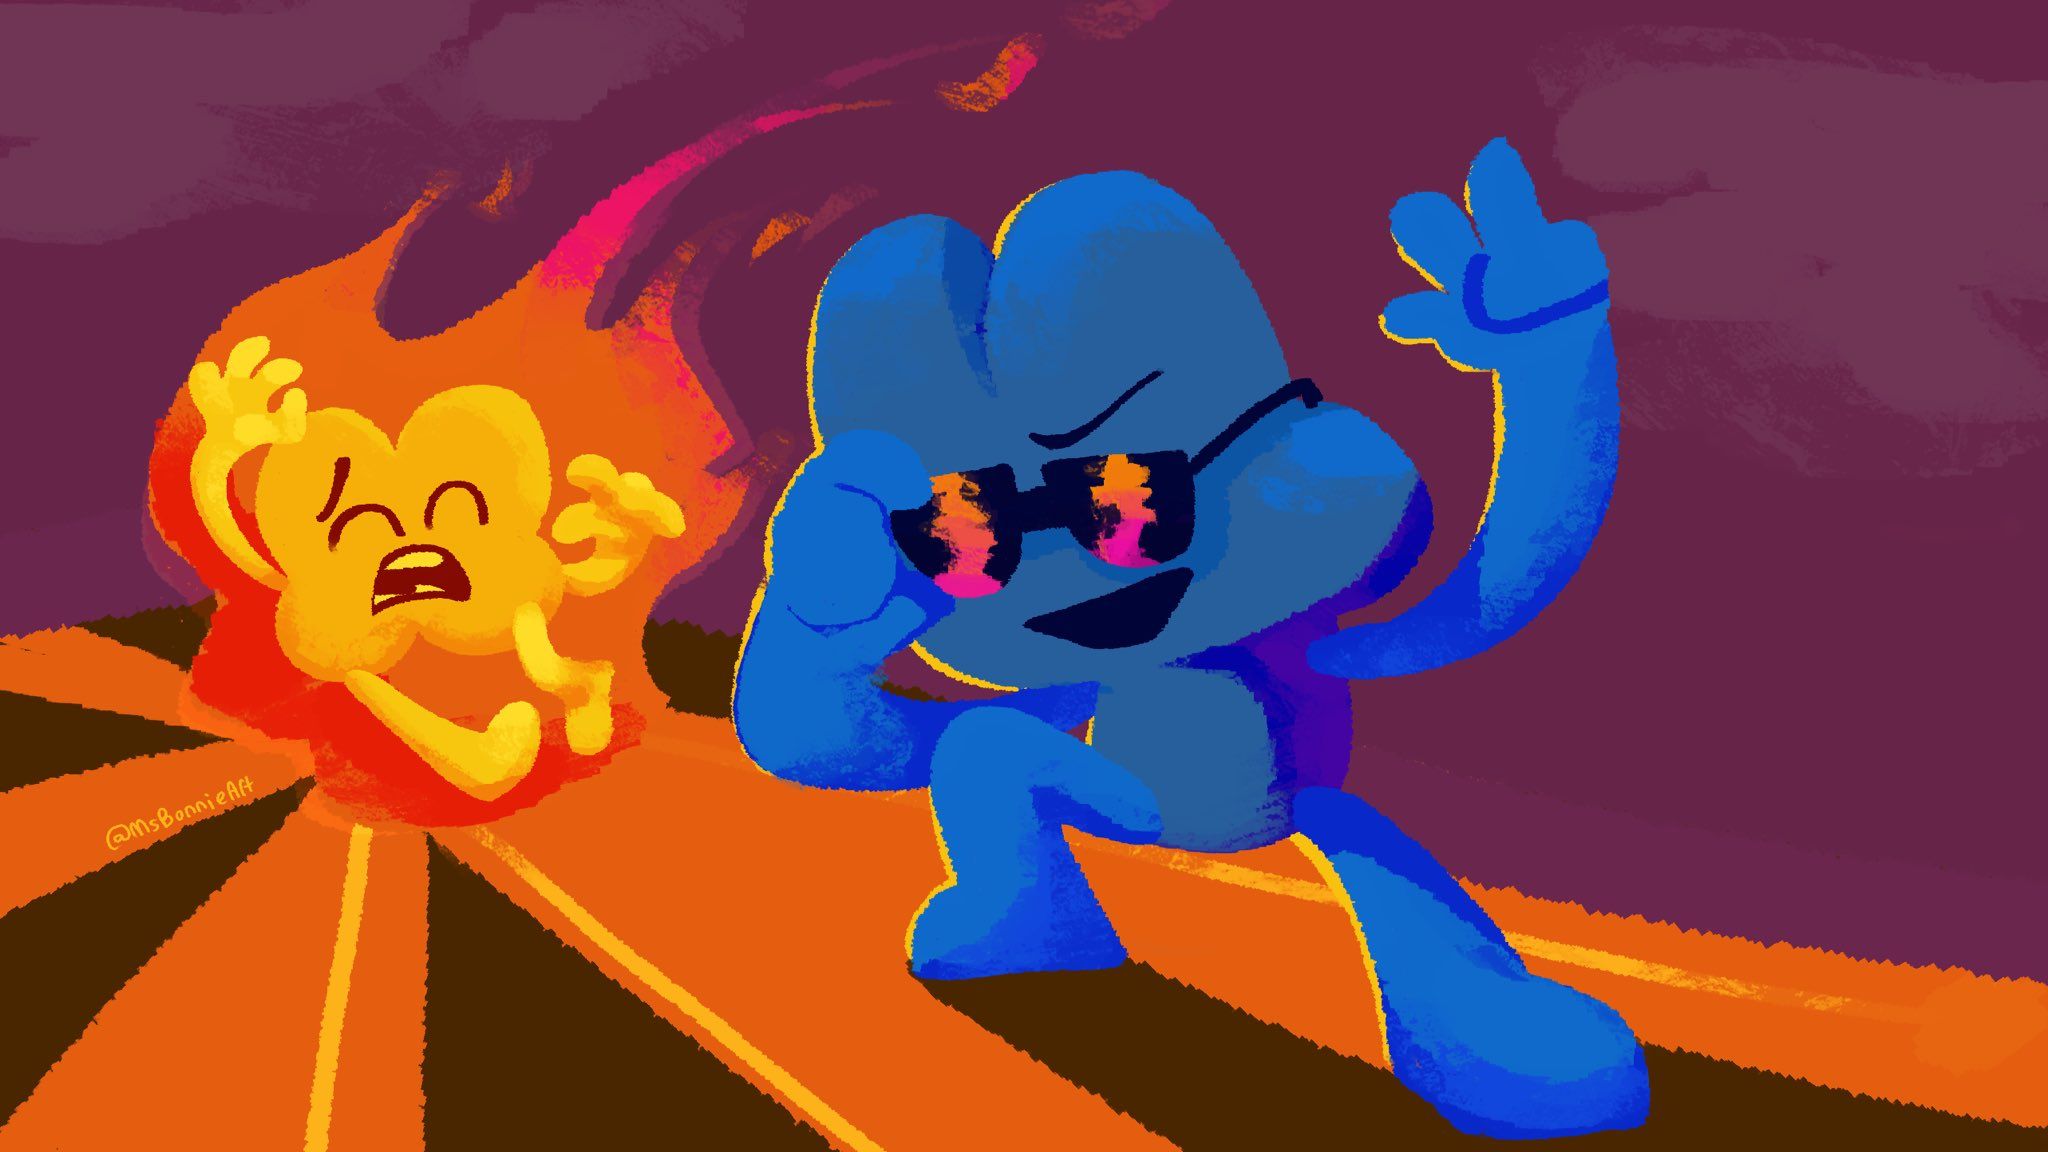 BFB Four Wallpapers - Wallpaper Cave.